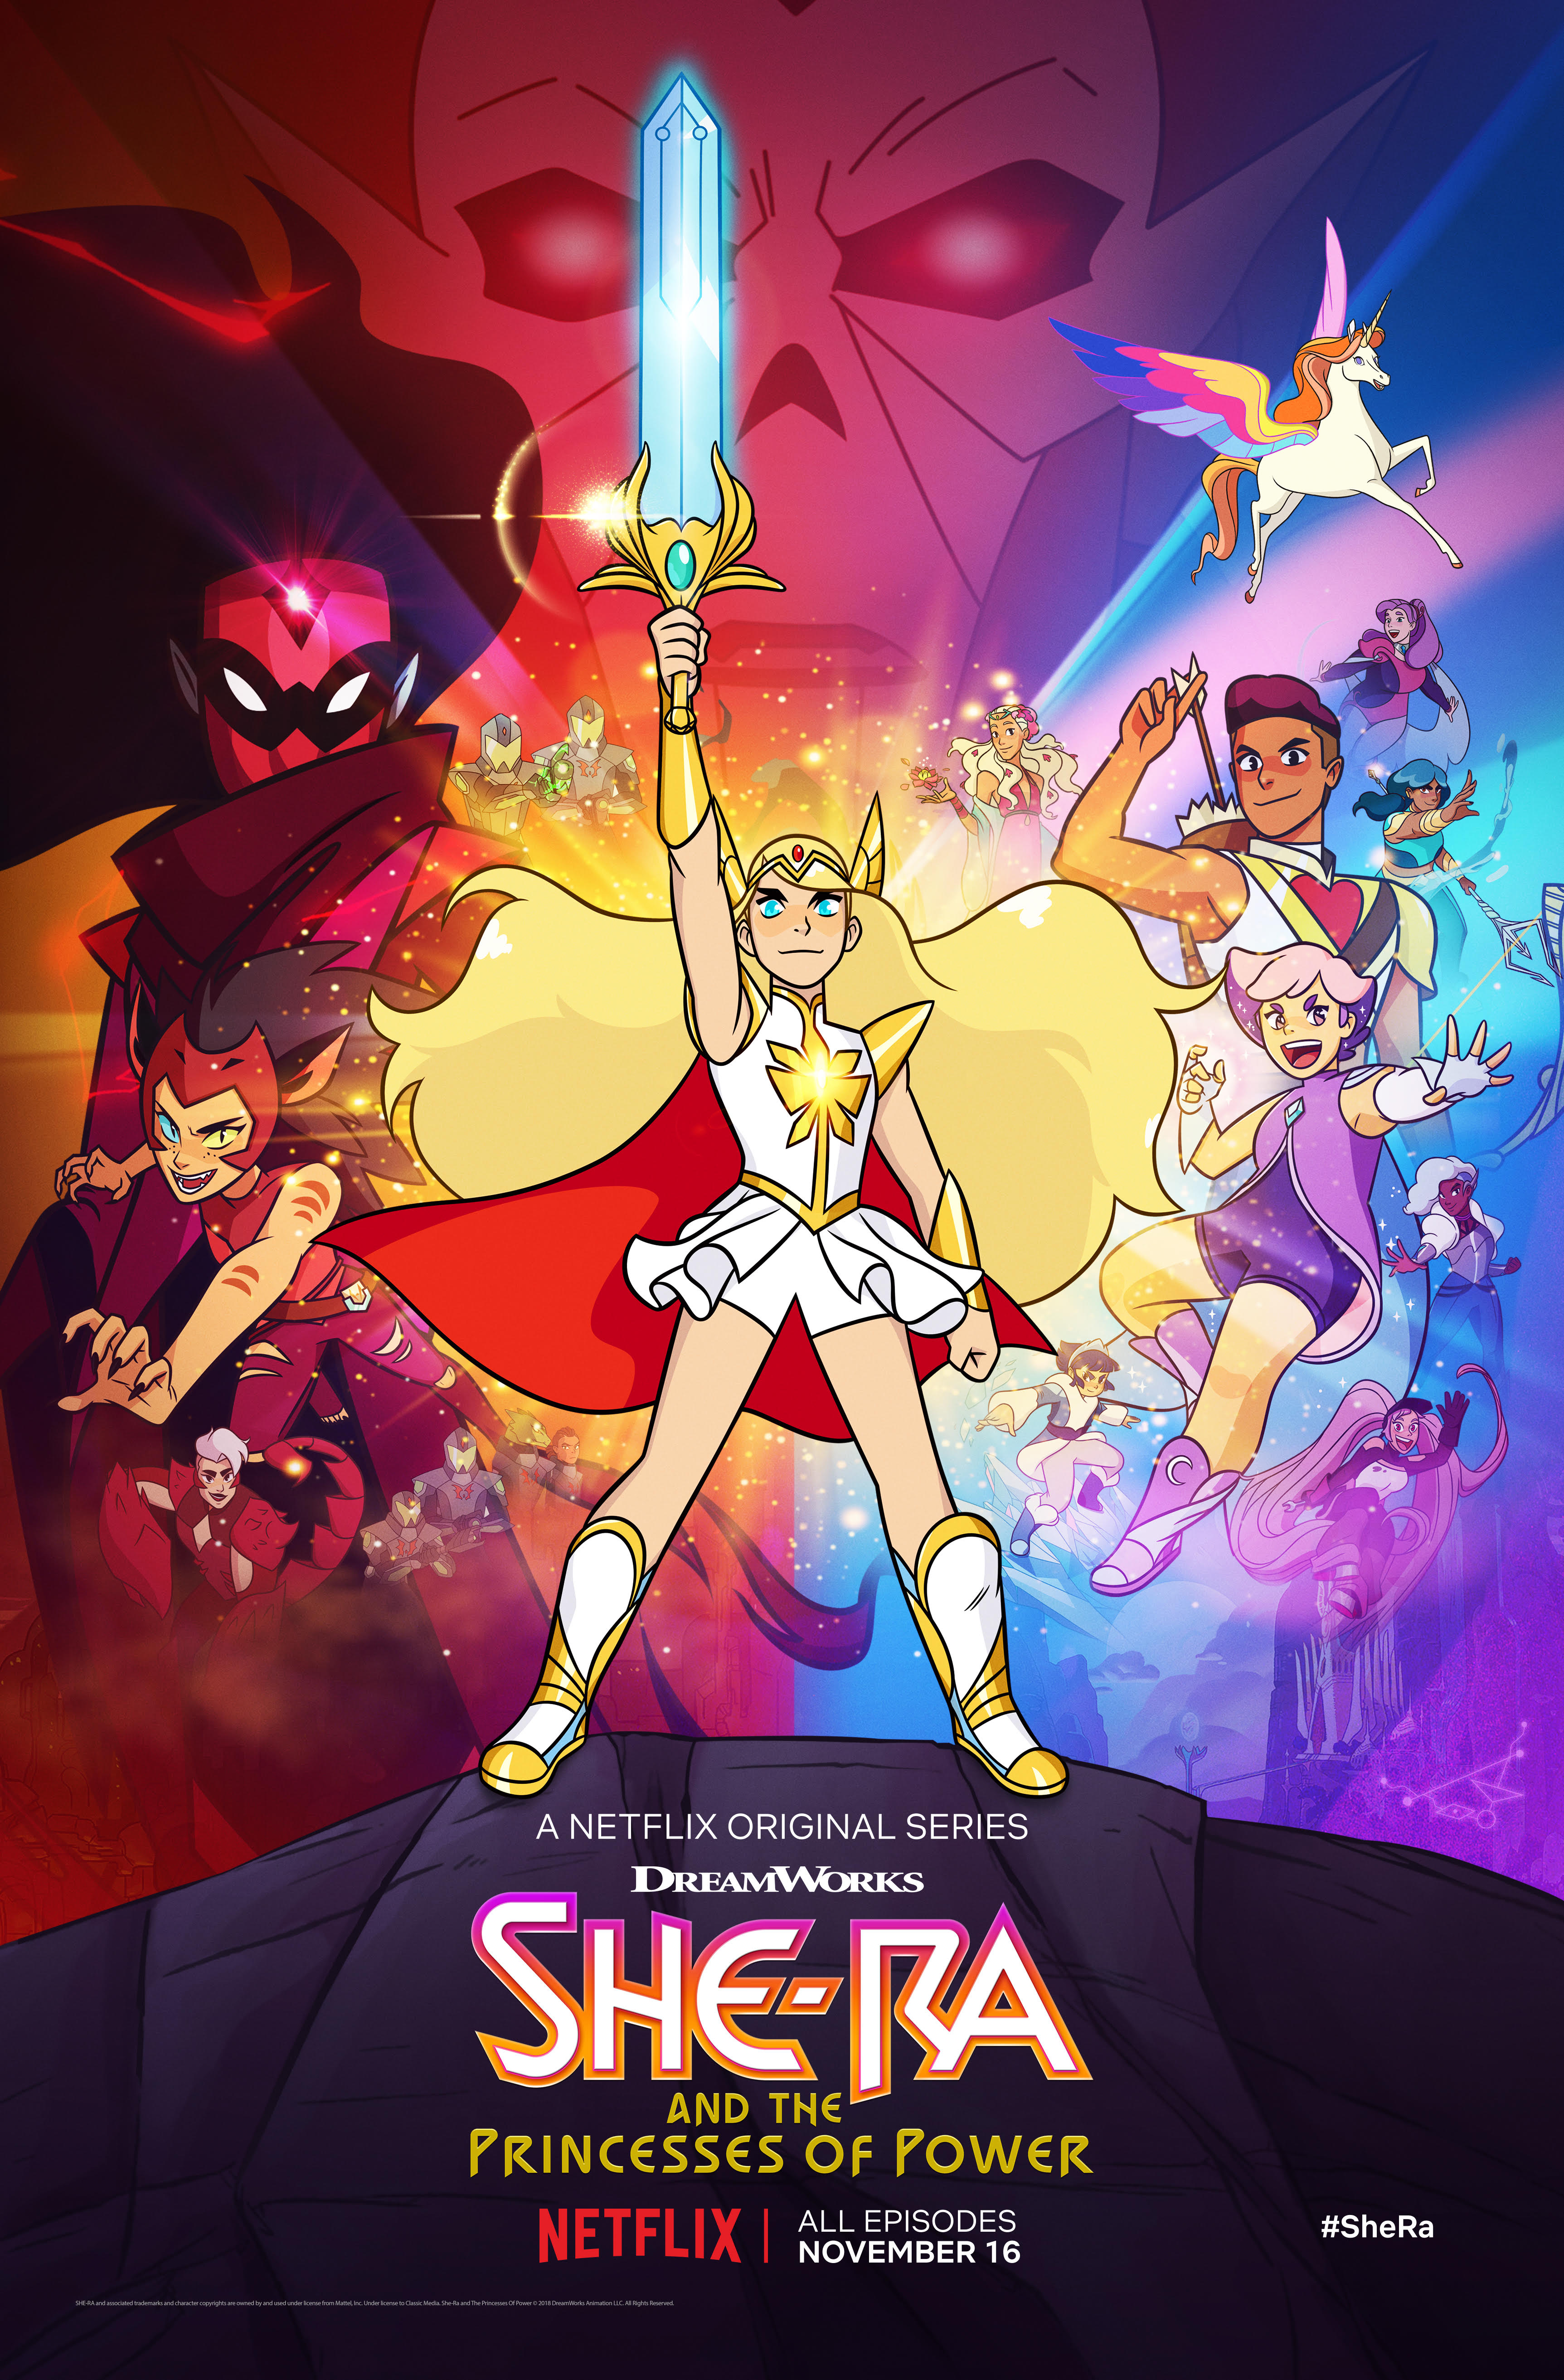 She Ra And The Princesses Of Power (TV Series 2018– )